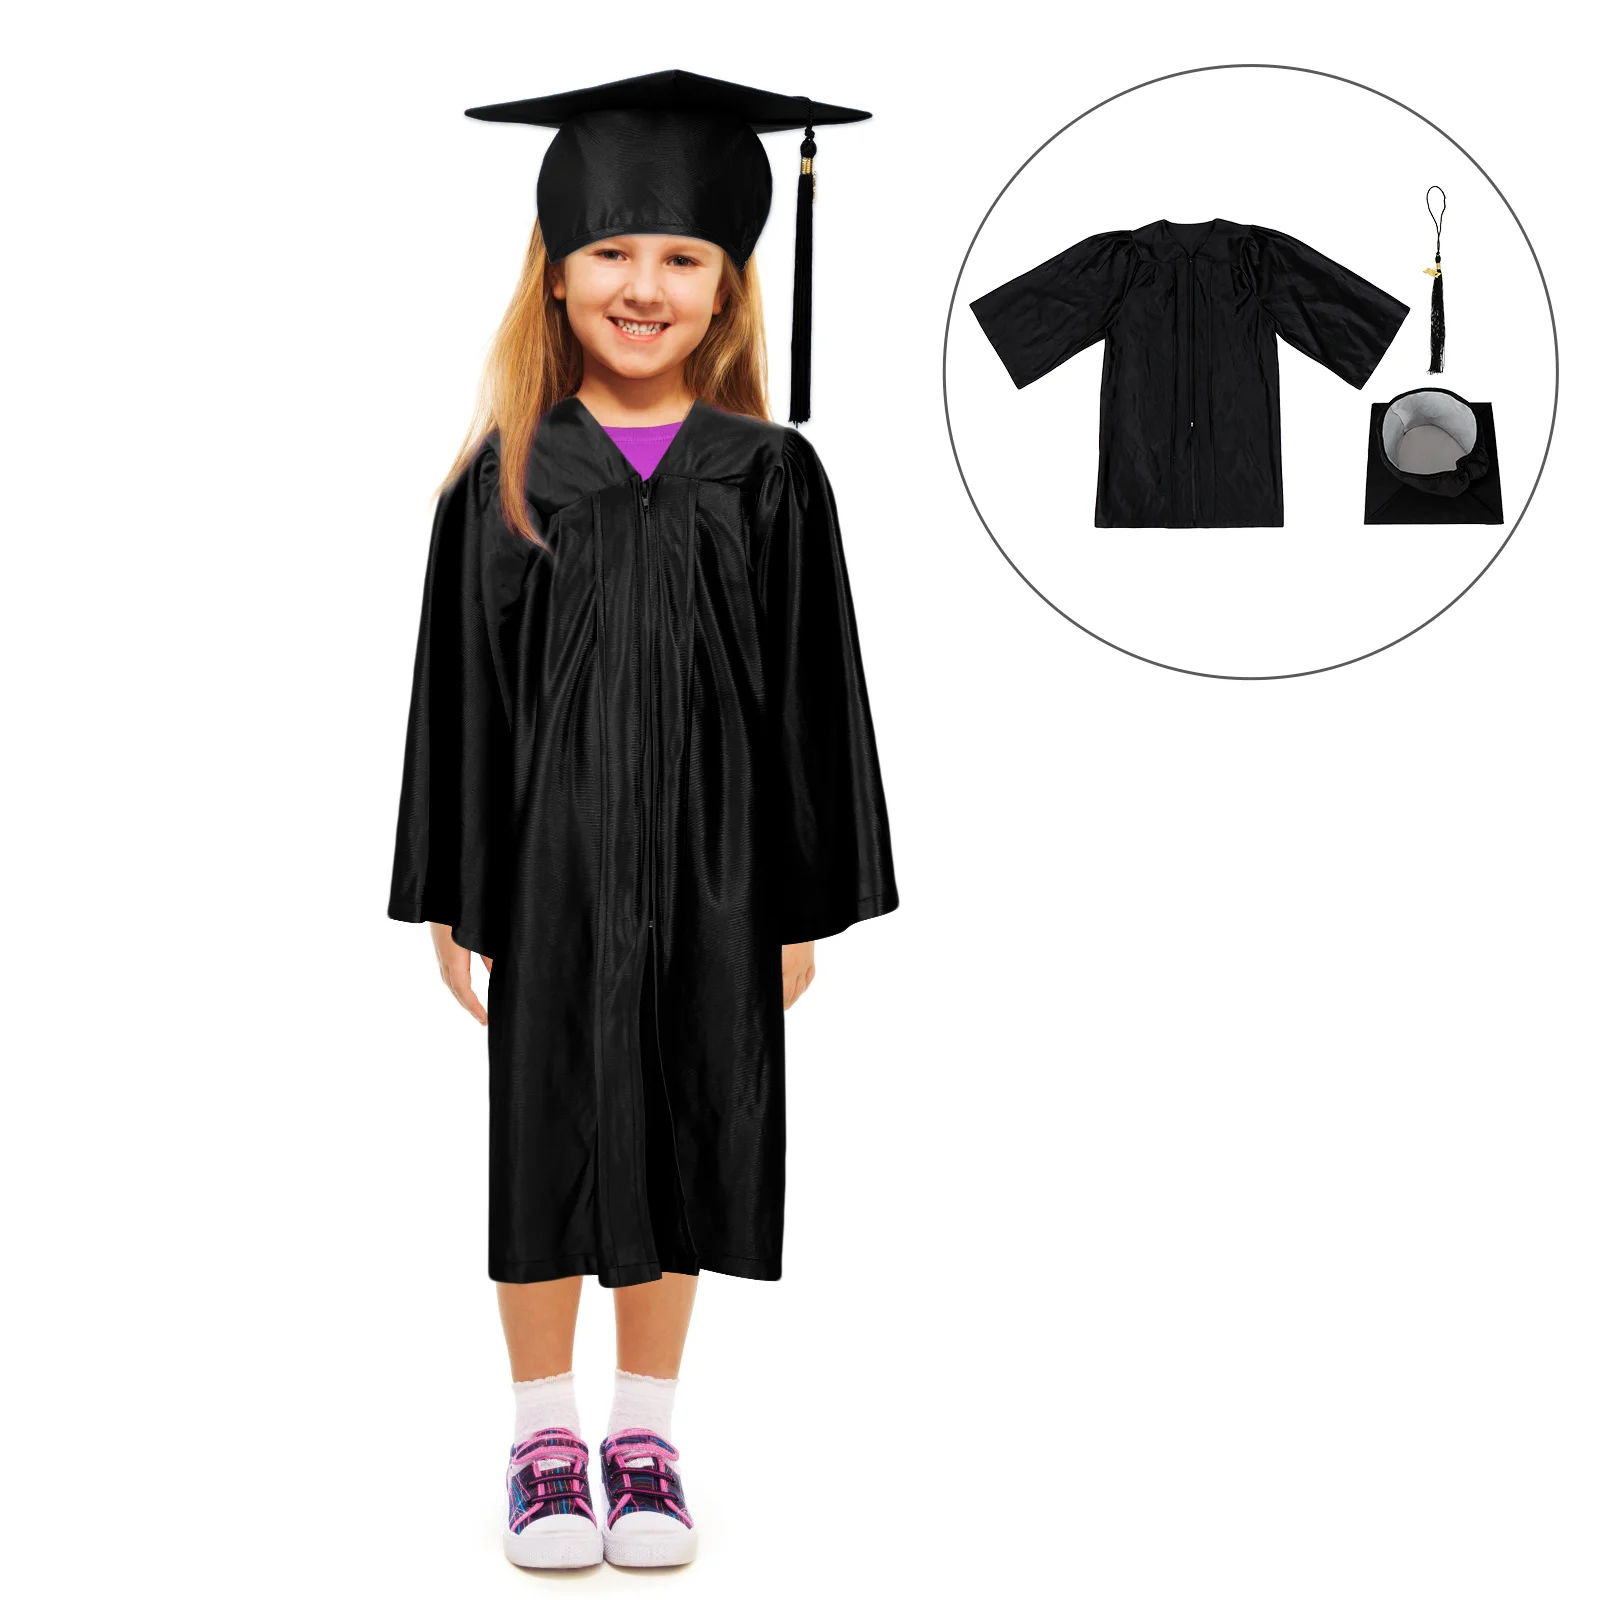 

Childrens Place Dress Children's Doctor's Clothing Kids Clothes Graduation Gown